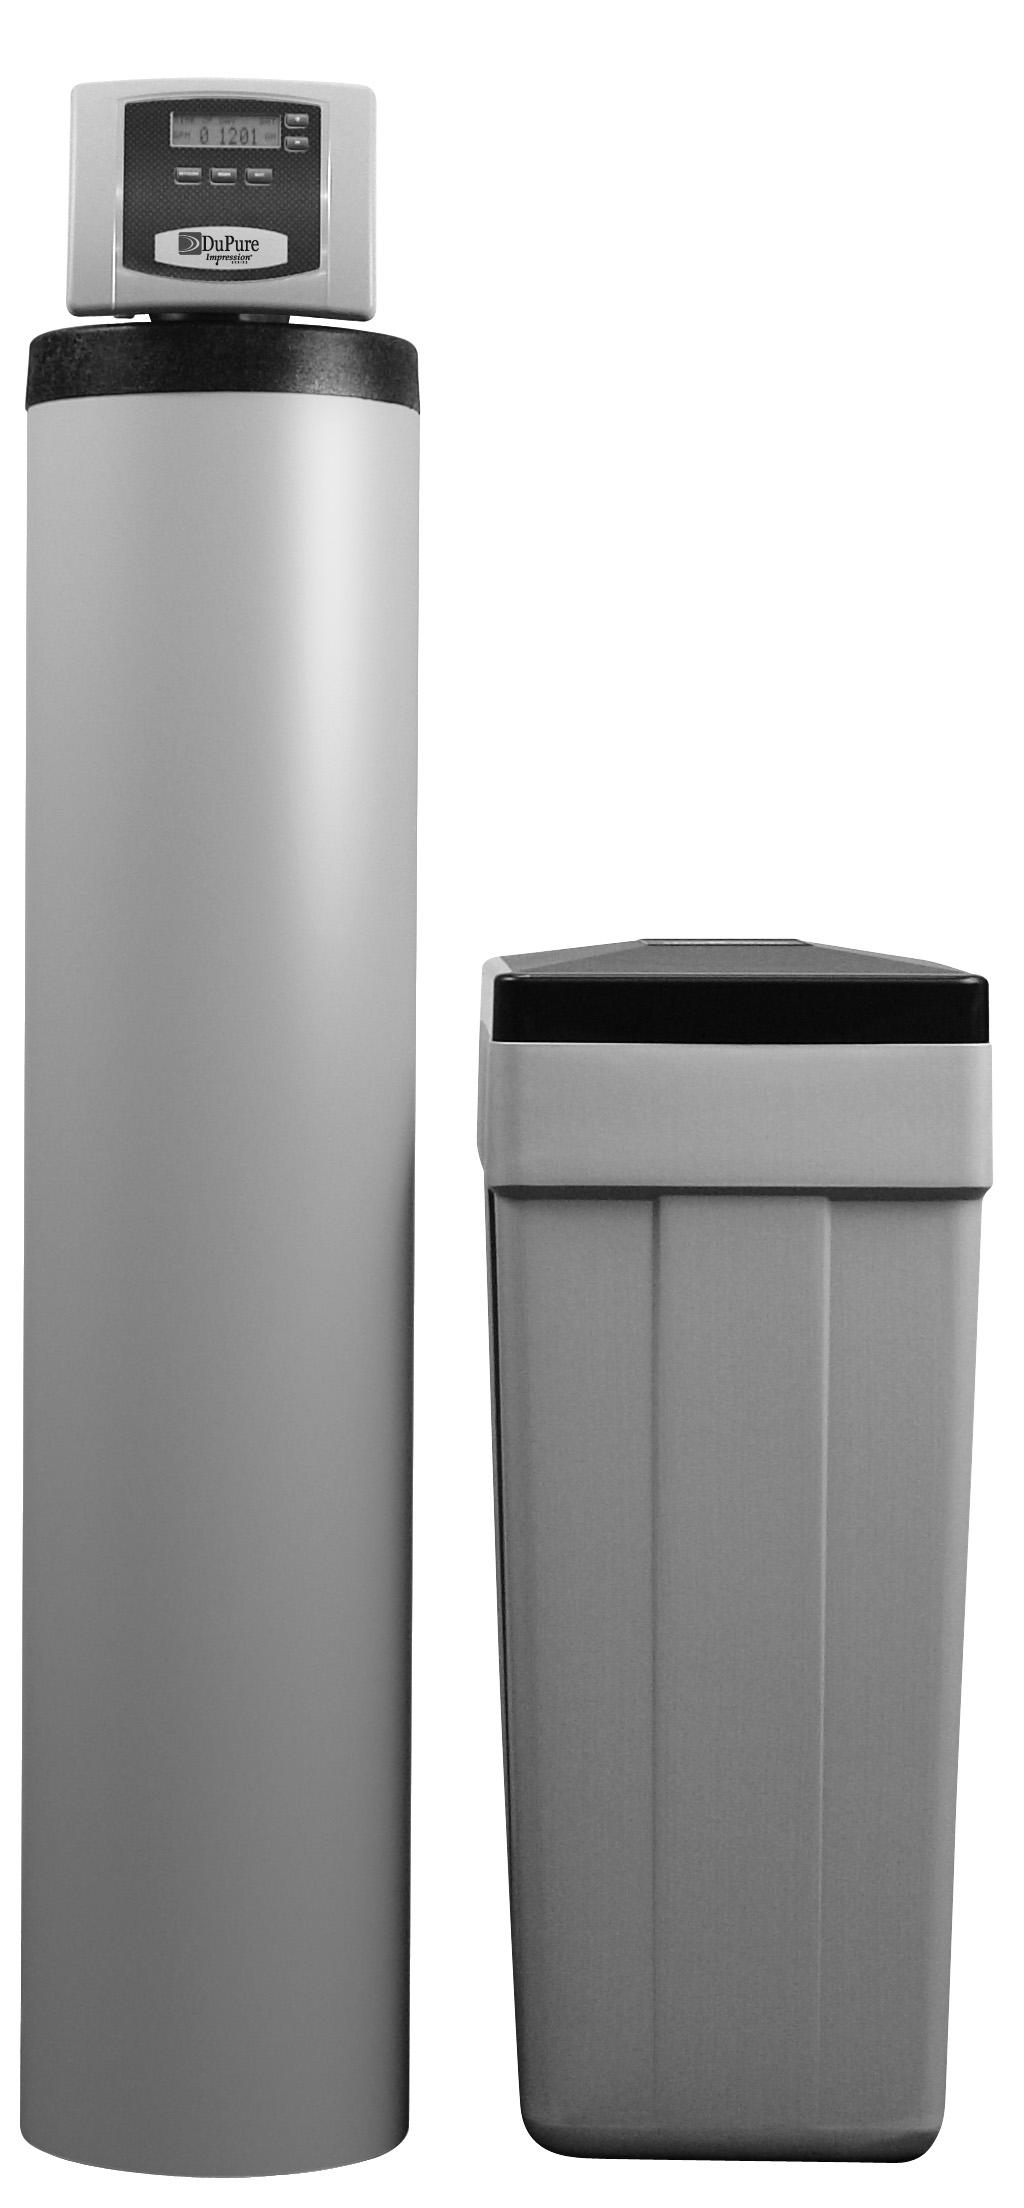 Installation Instructions & Owner s Manual Impression Series Metered Water Softeners For Models: IM-844DUPURE